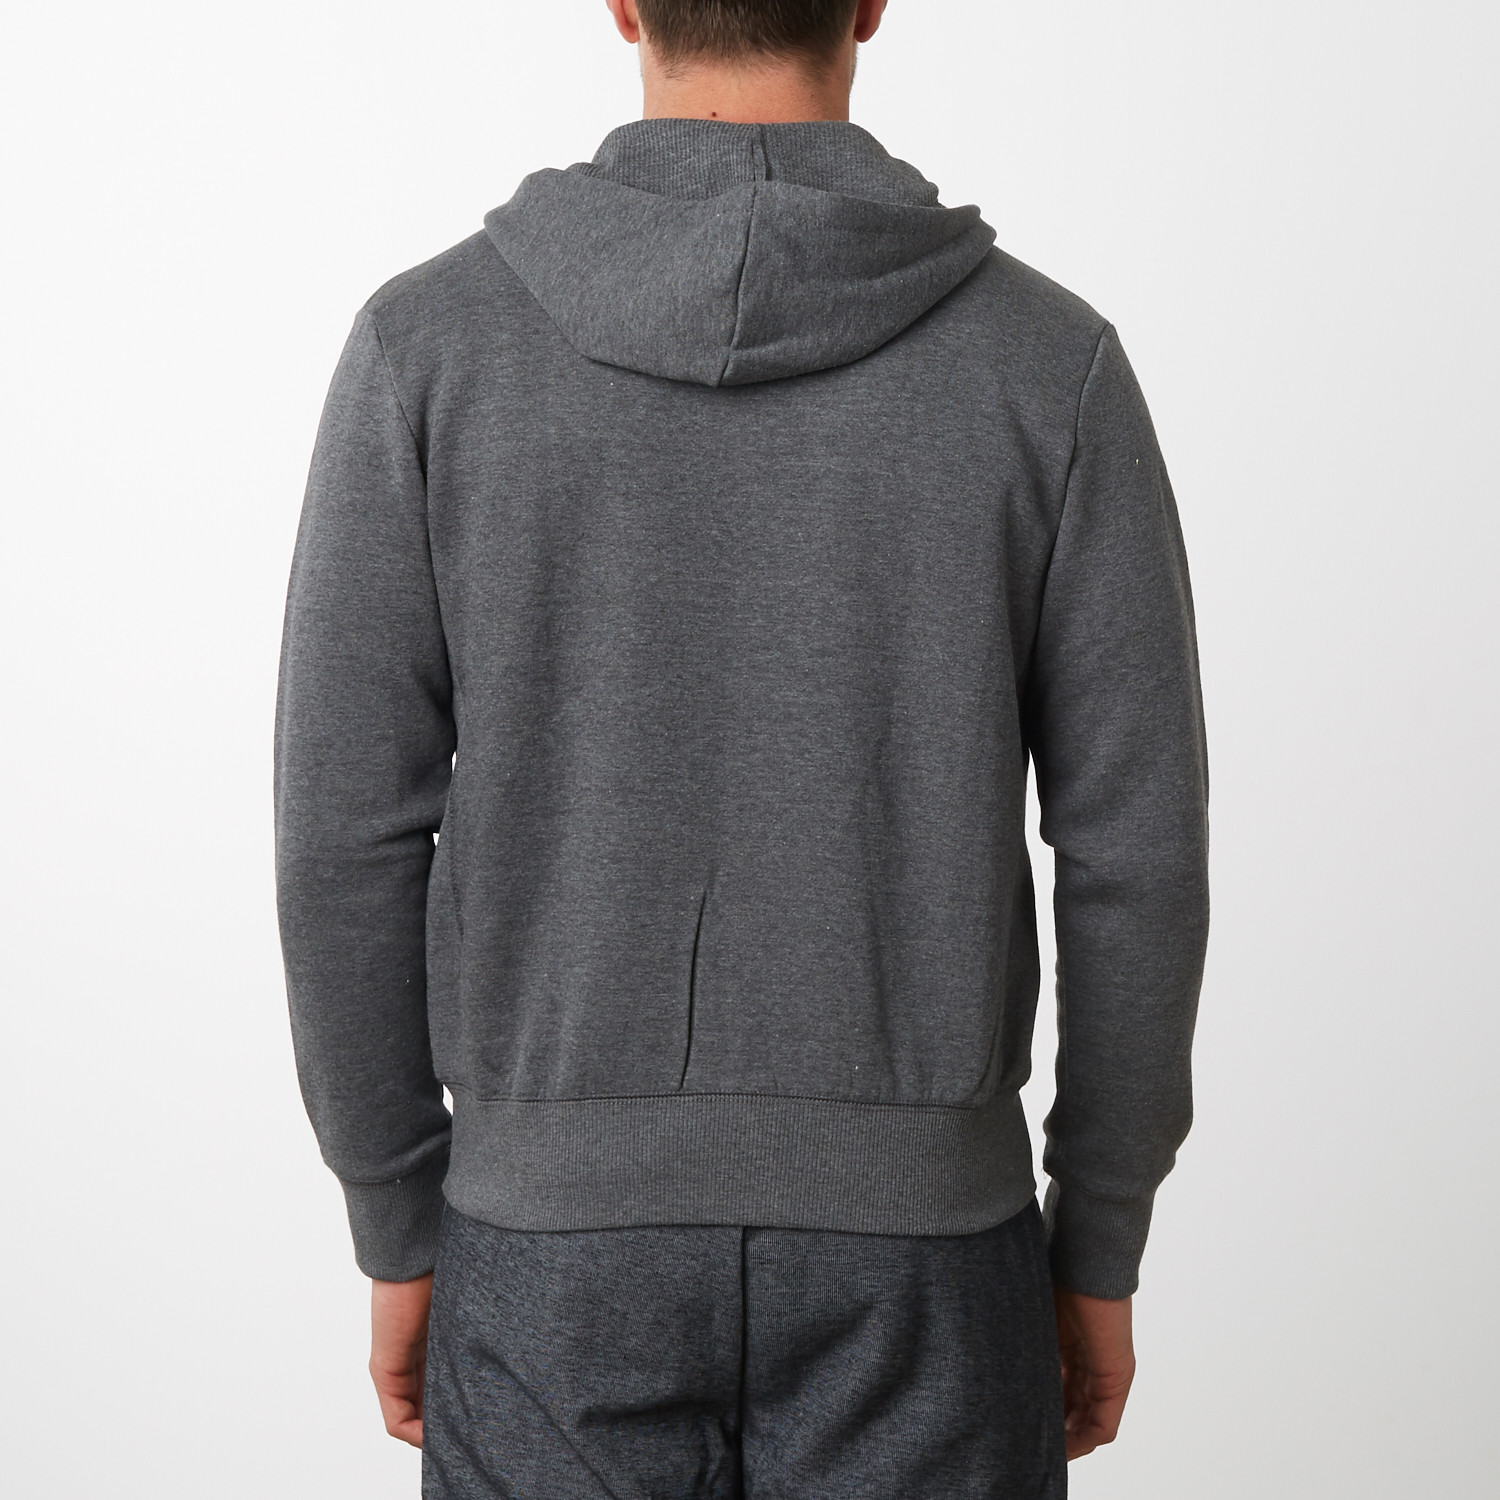 Tech Fleece Thermal Lined Hoodie // Charcoal (S) - Ethan Williams ...